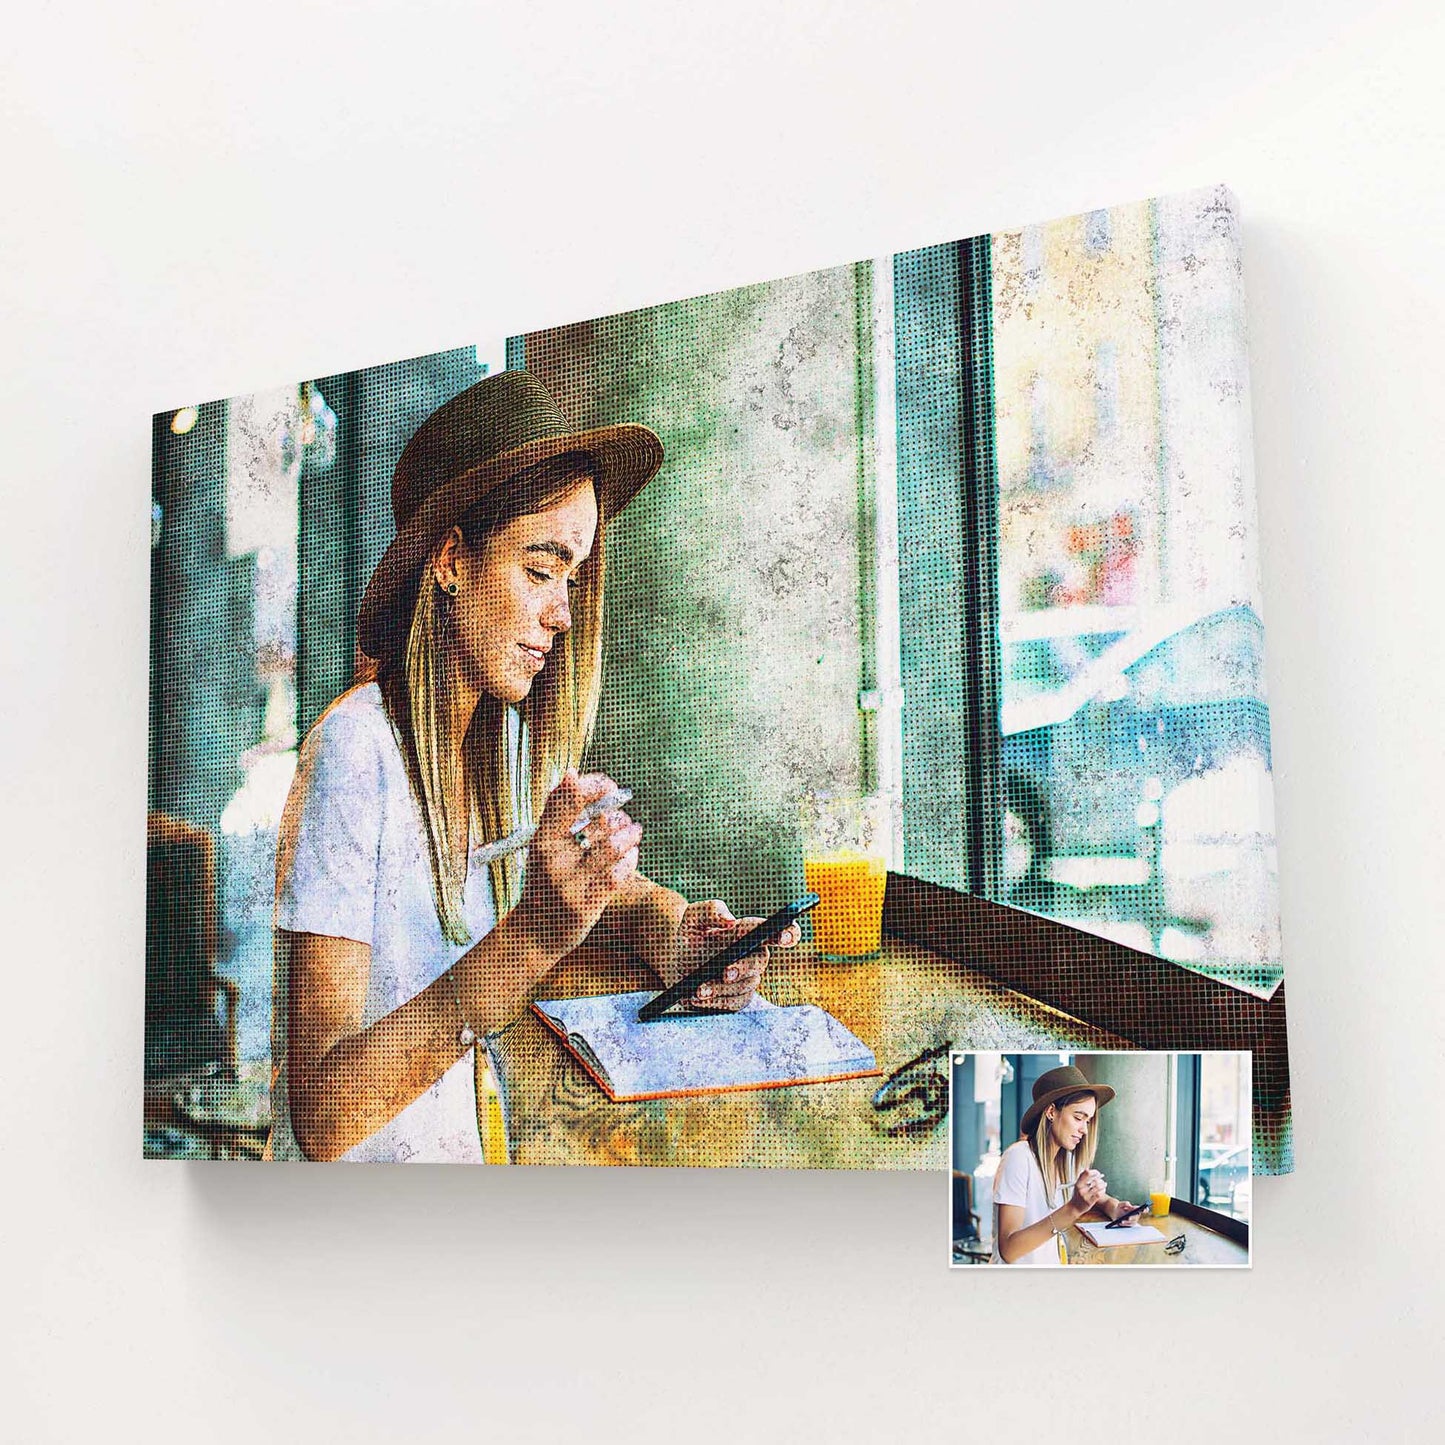 Elevate your space with the coolness and trendiness of our Personalised Retro Grunge FX Canvas. Printed from your photo, this unique wall art captures the essence of the 90s vibe and brings a novelty touch to your home decor